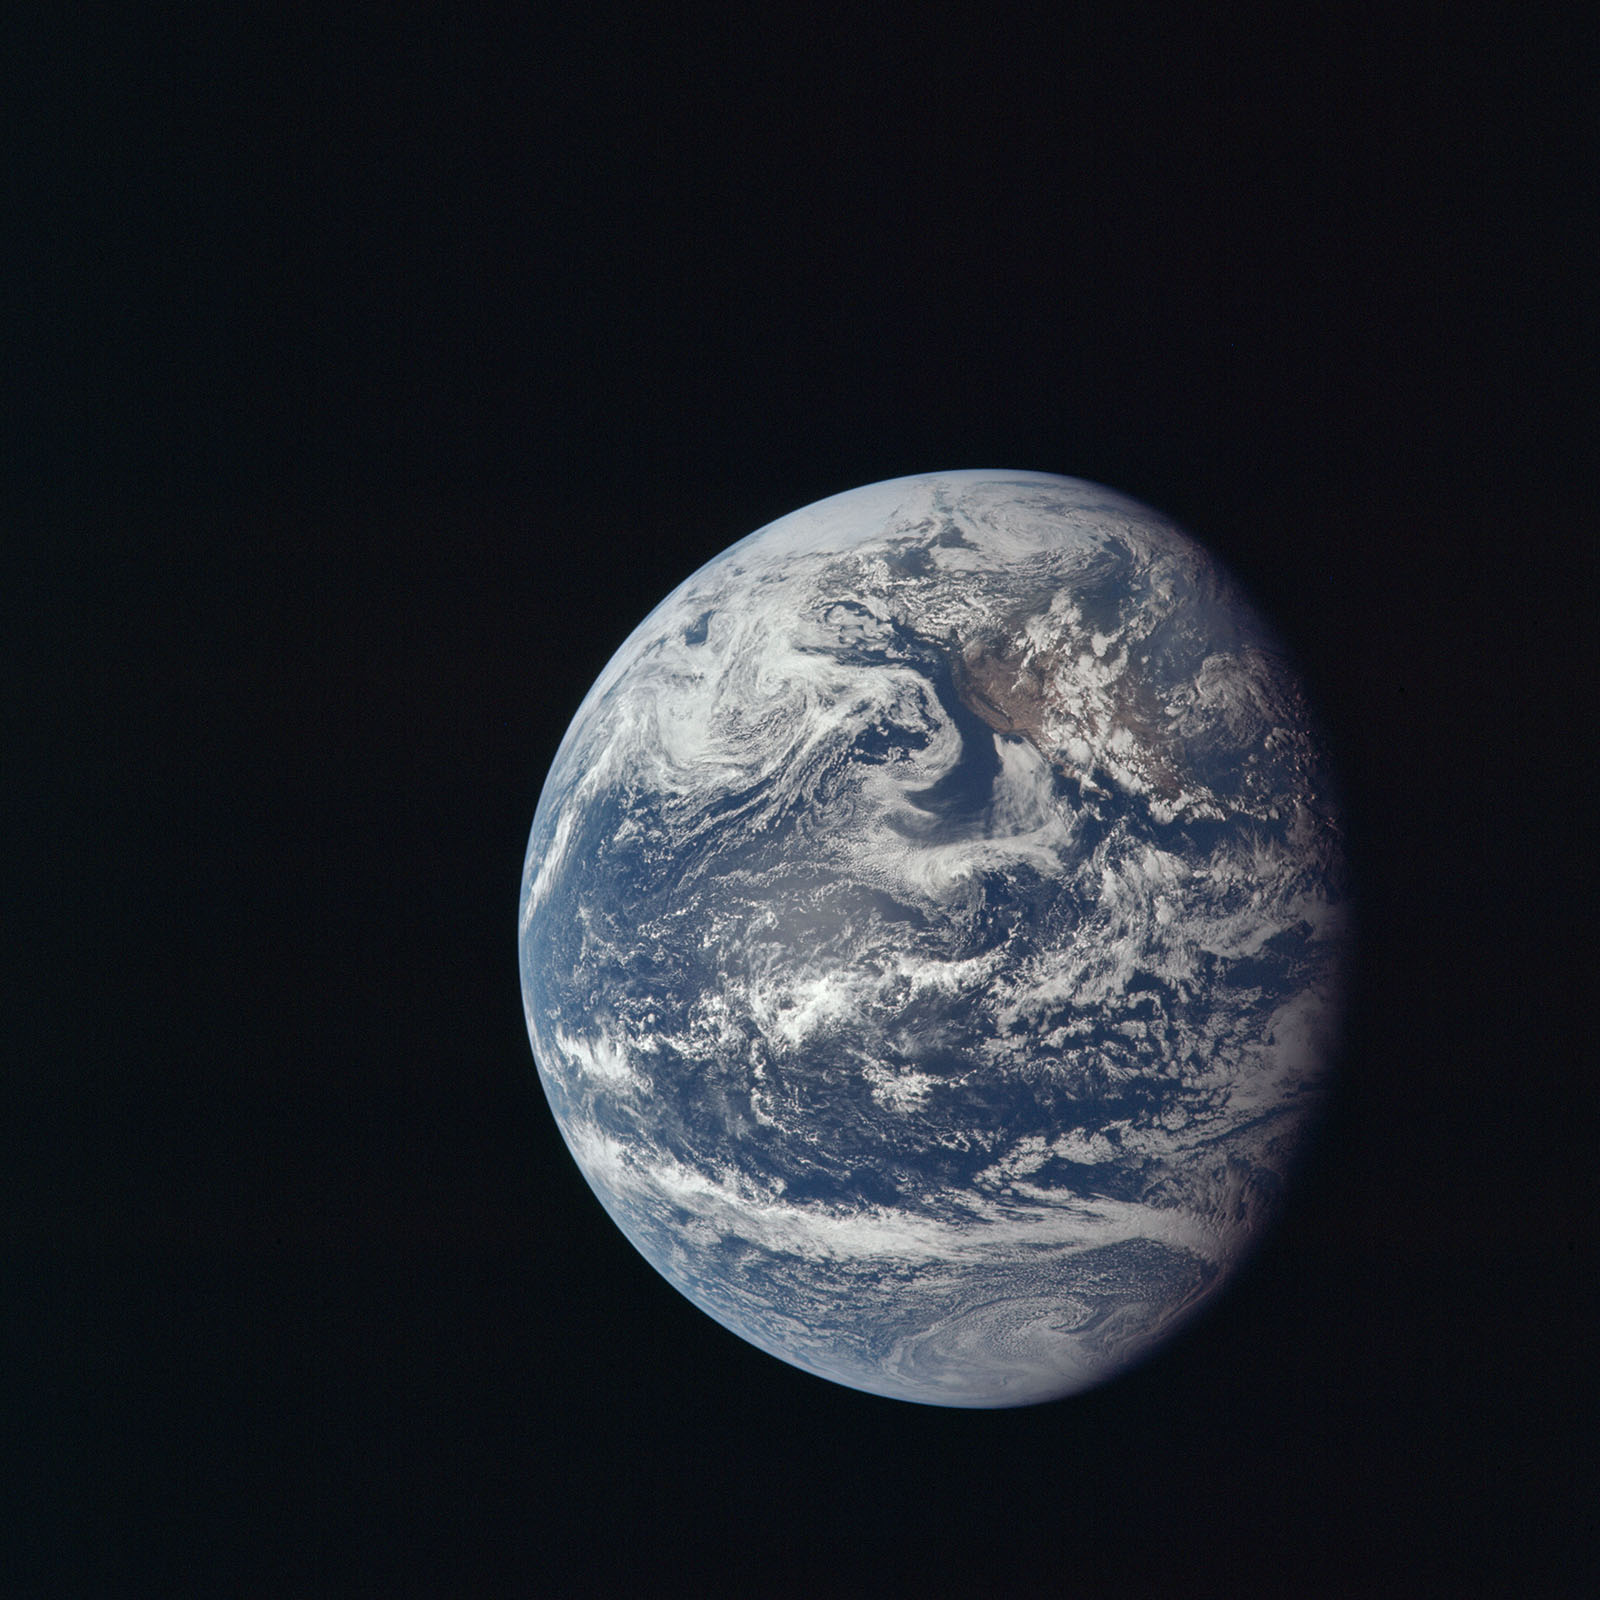 View of Earth taken by Apollo 11 crew members. Image courtesy of NASA.